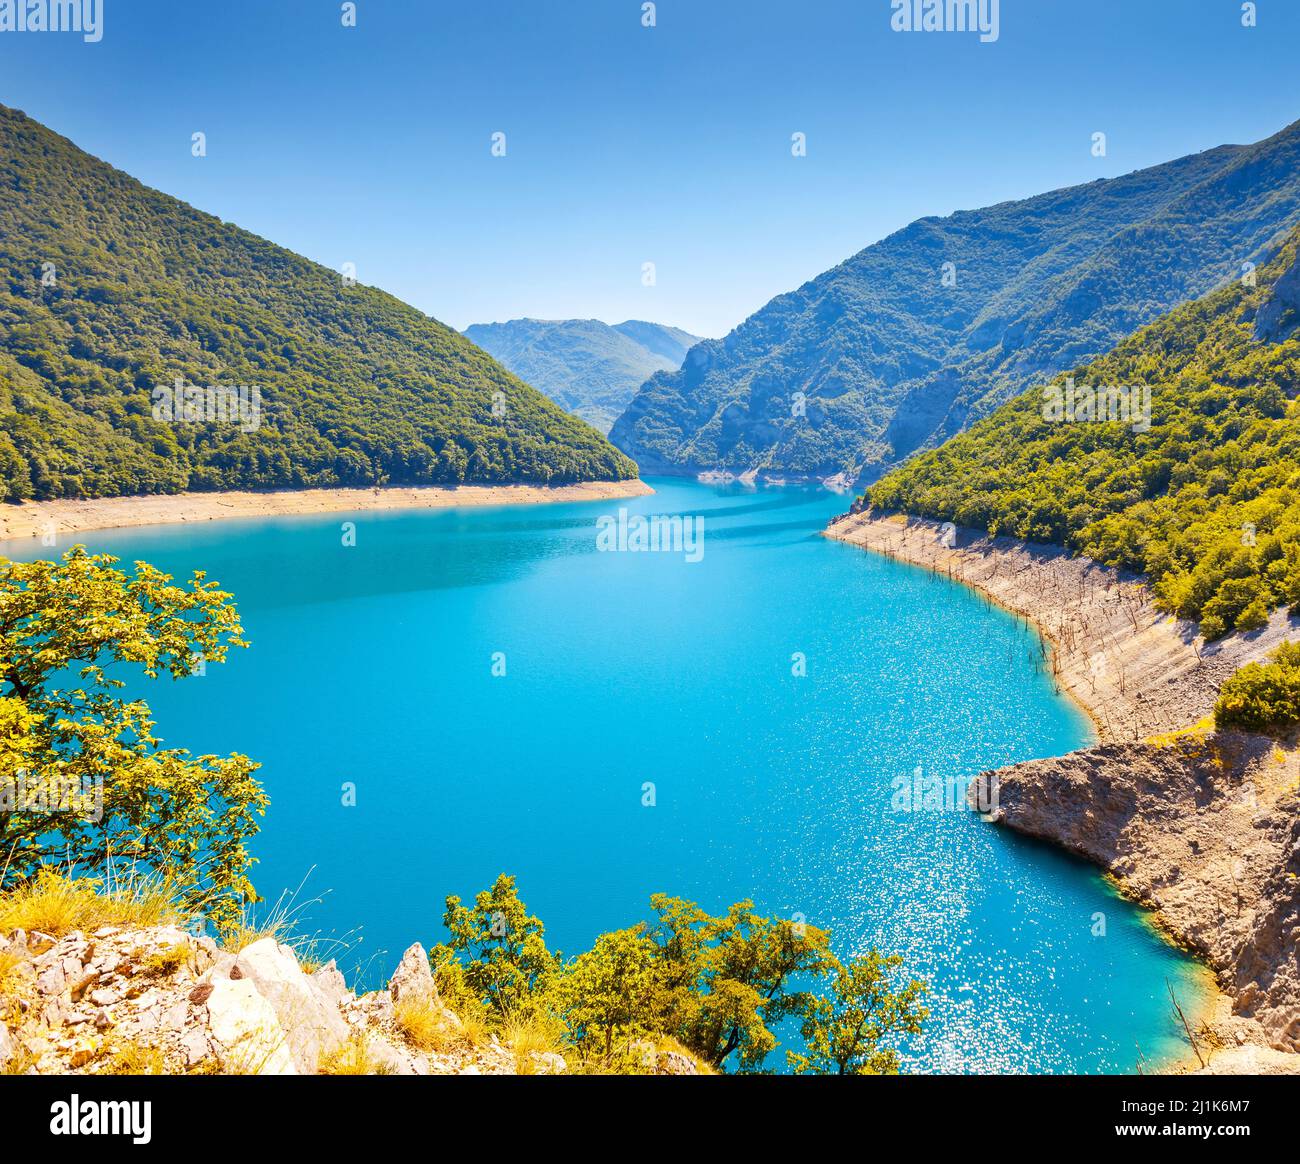 The famous Piva Canyon with its fantastic reservoir. National park Montenegro and Bosnia and Herzegovina, Balkans, Europe. Beauty world. Stock Photo